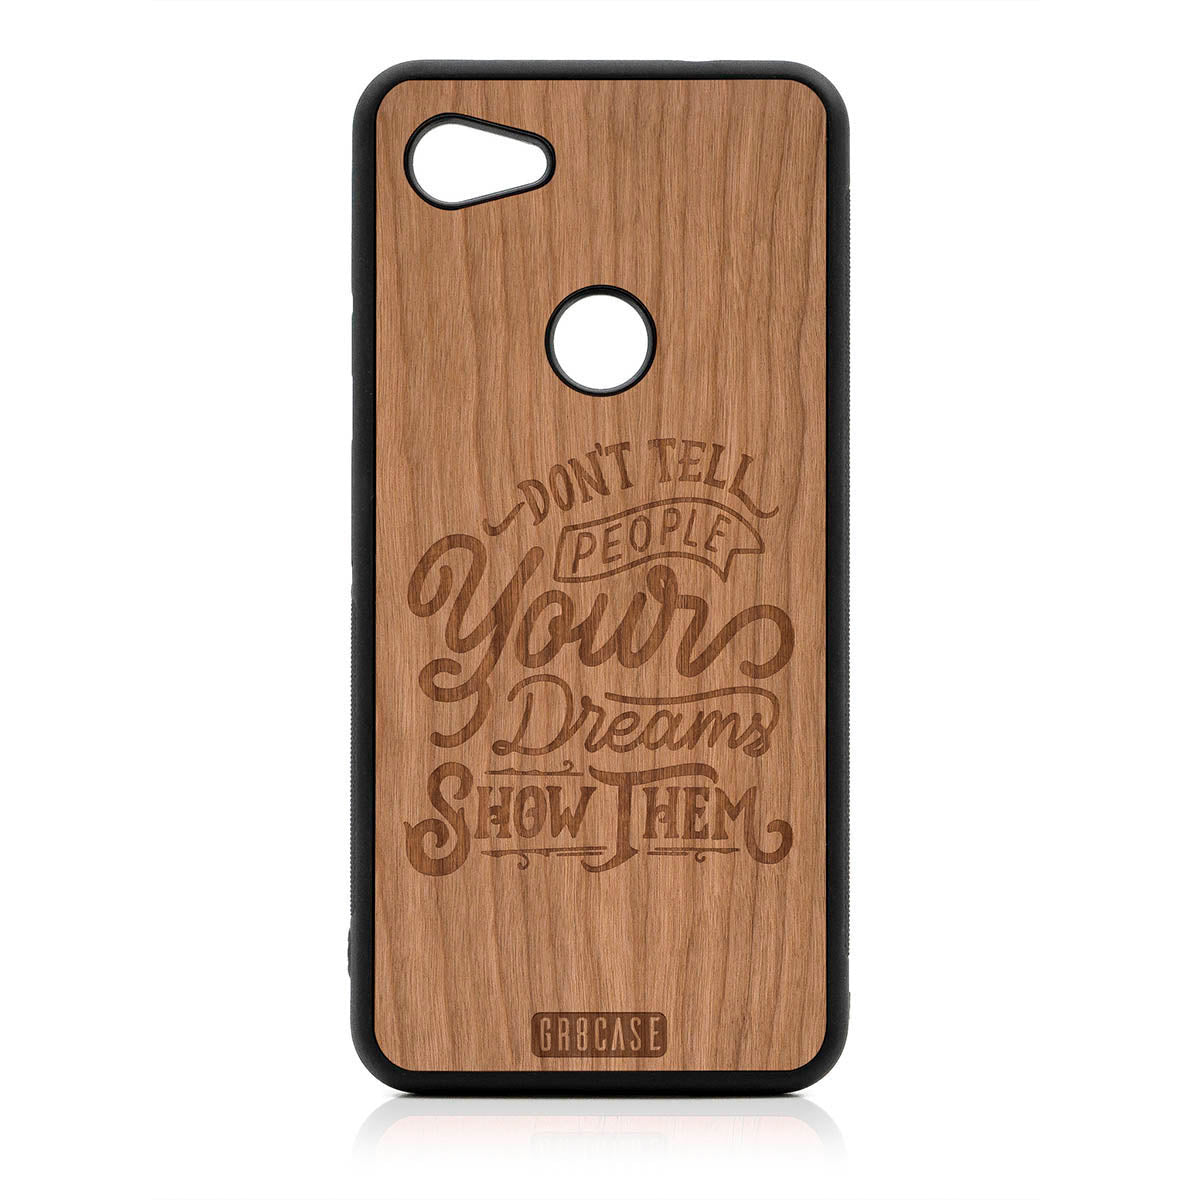 Don't Tell People Your Dreams Show Them Design Wood Case For Google Pixel 3A by GR8CASE